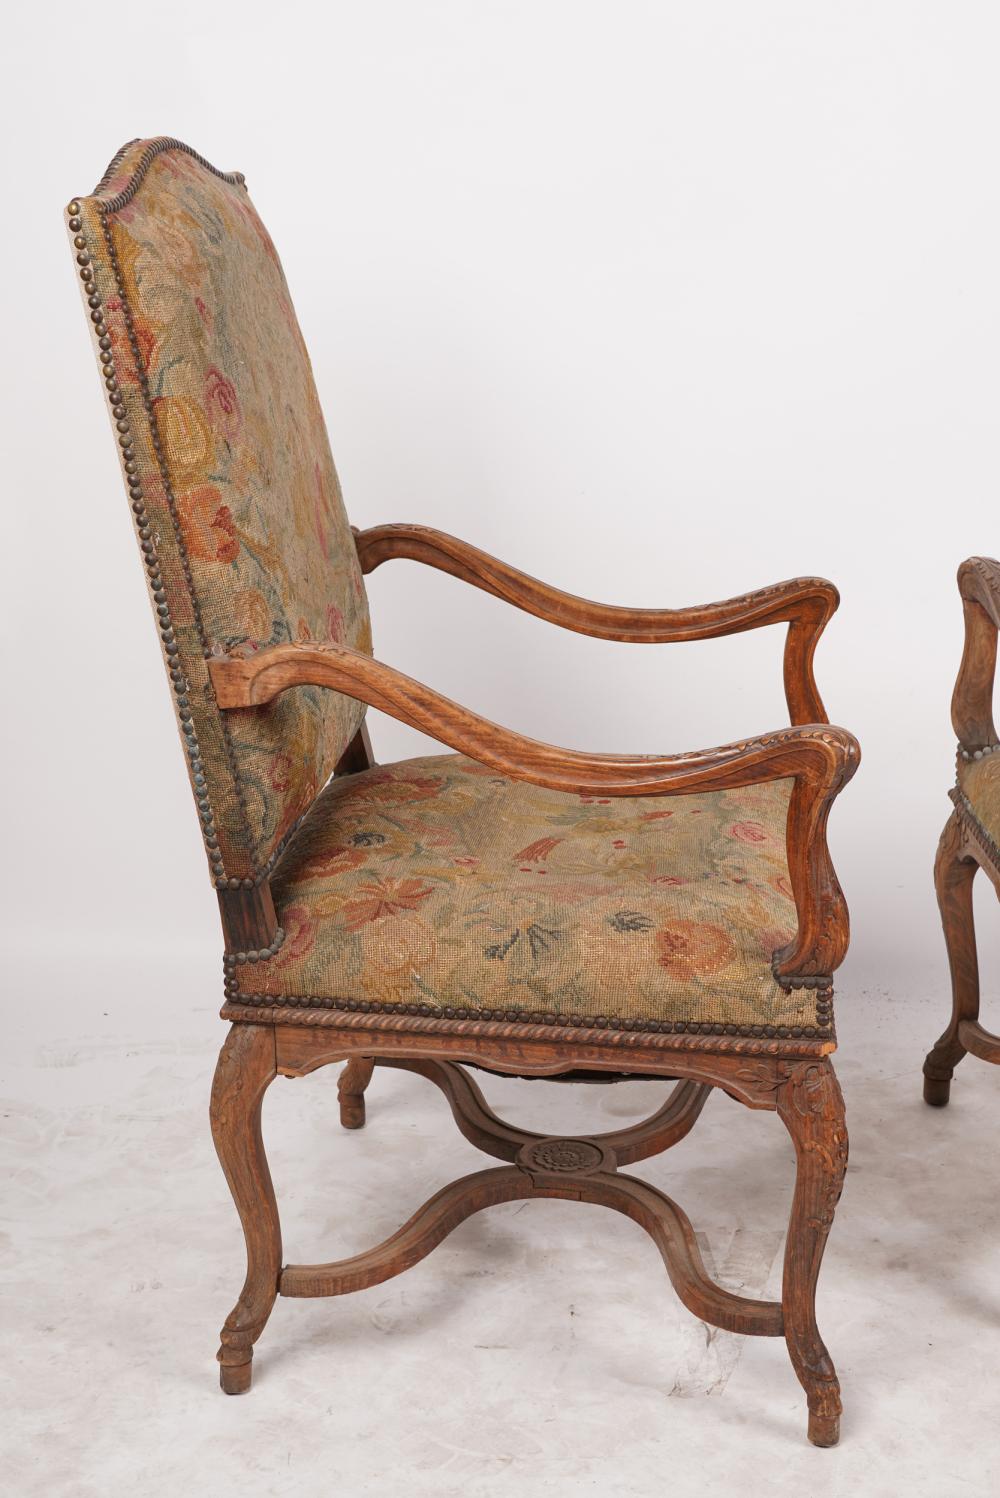 AF2-003: ANTIQUE PAIR OF LATE 19TH C FRENCH LOUIS XV STYLE CARVED FRUITWOOD FAUTEUILS